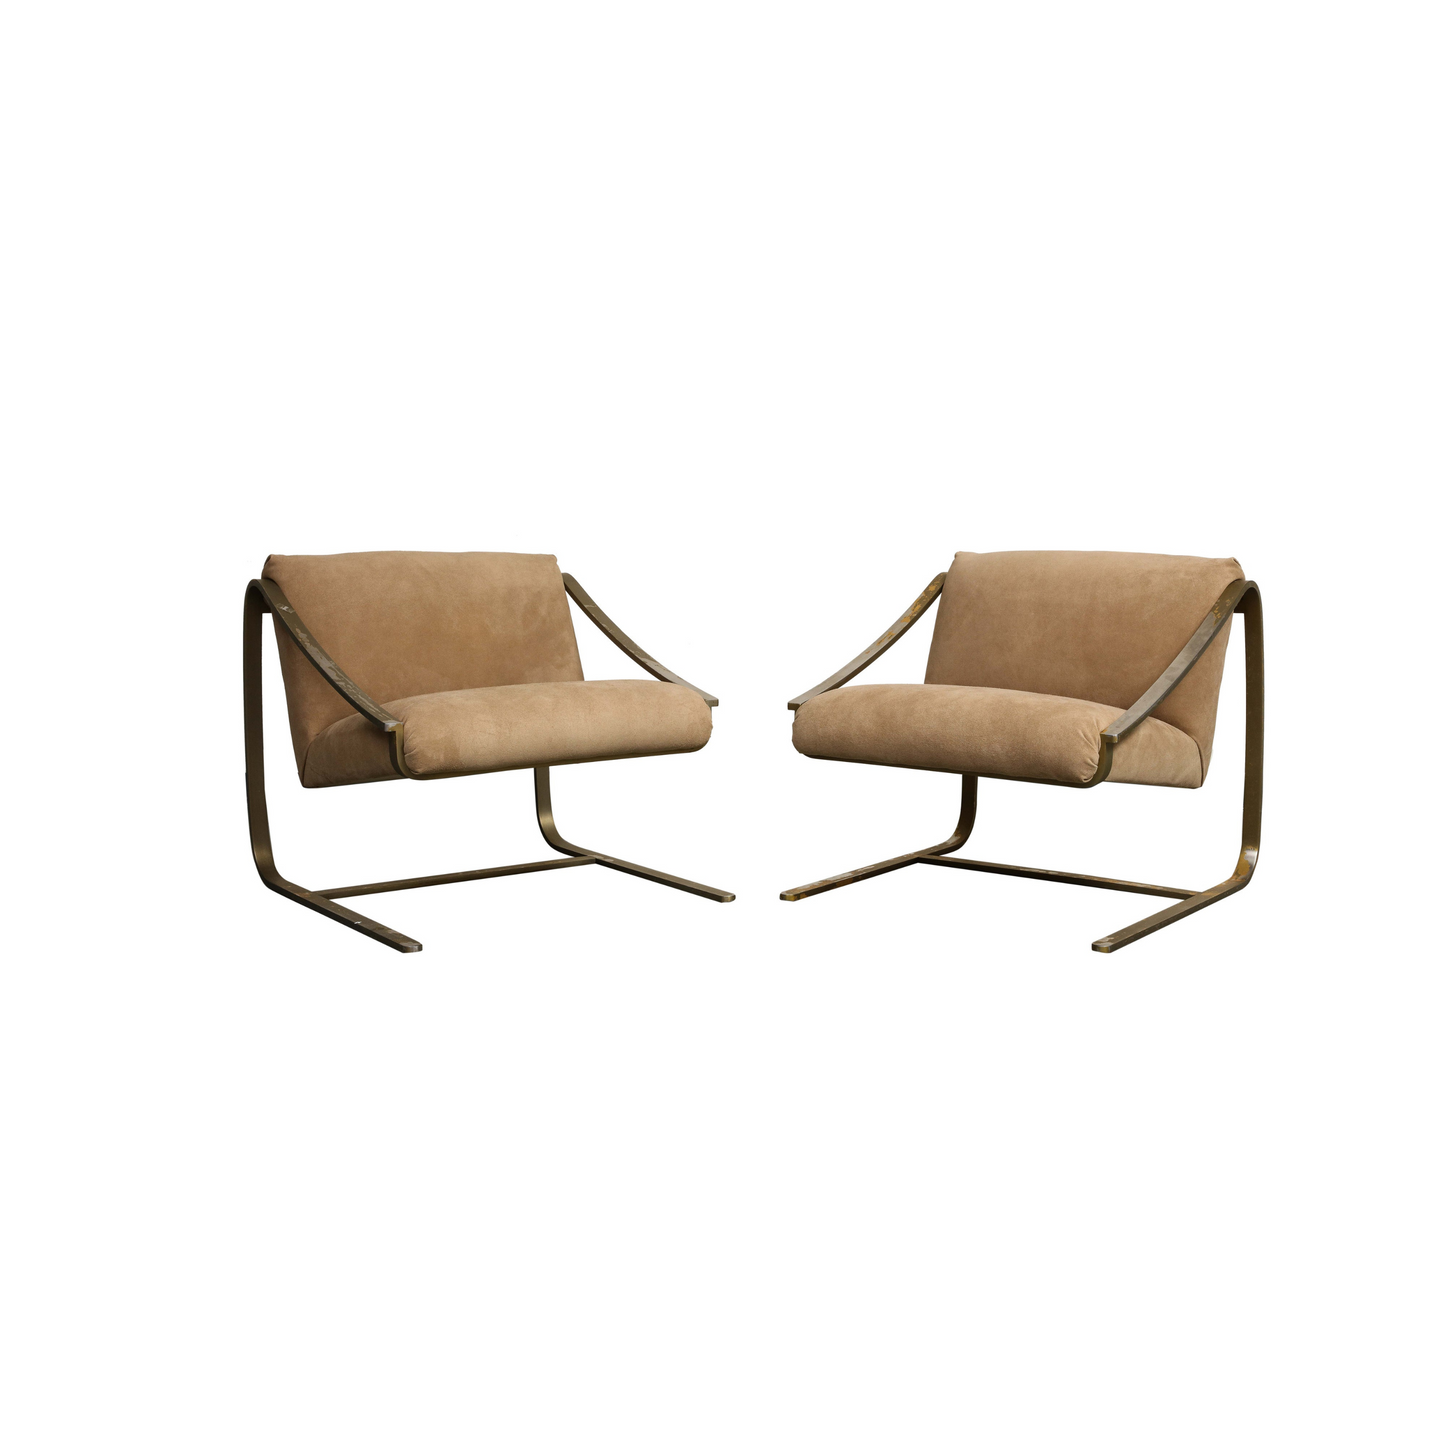 Pair of Bronze and Suede Modernist Lounge Chairs, circa 1965